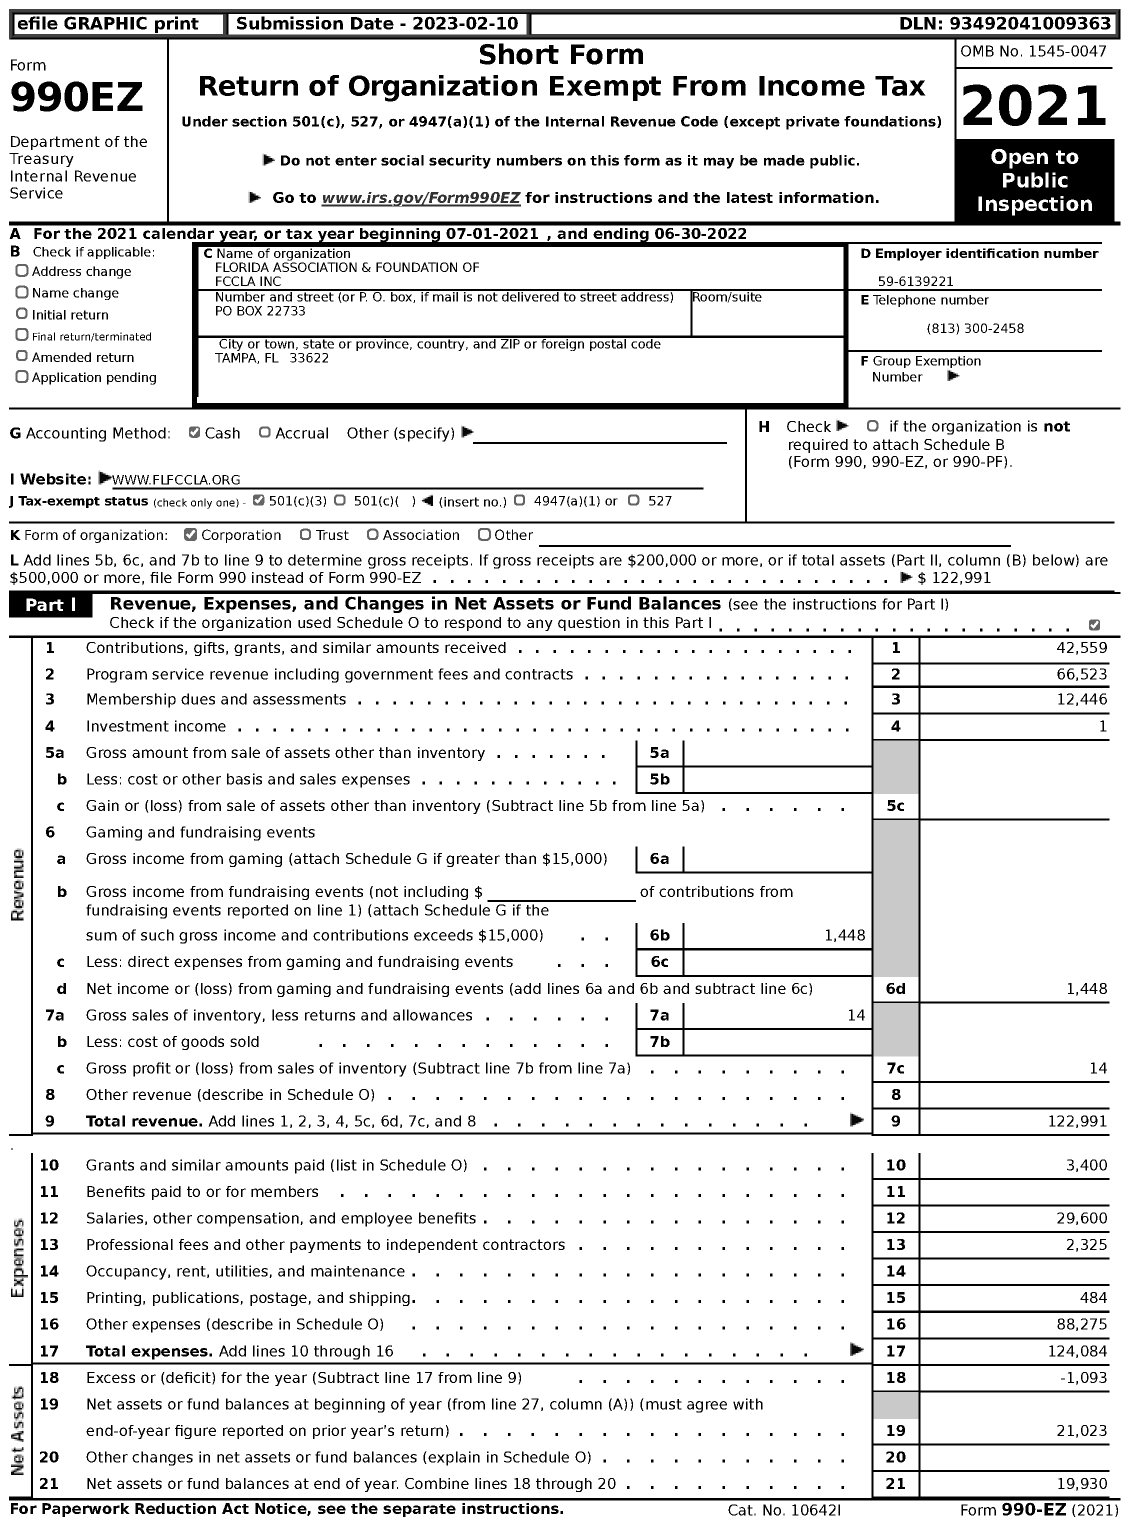 Image of first page of 2021 Form 990EZ for Florida Association and Foundation of Fccla